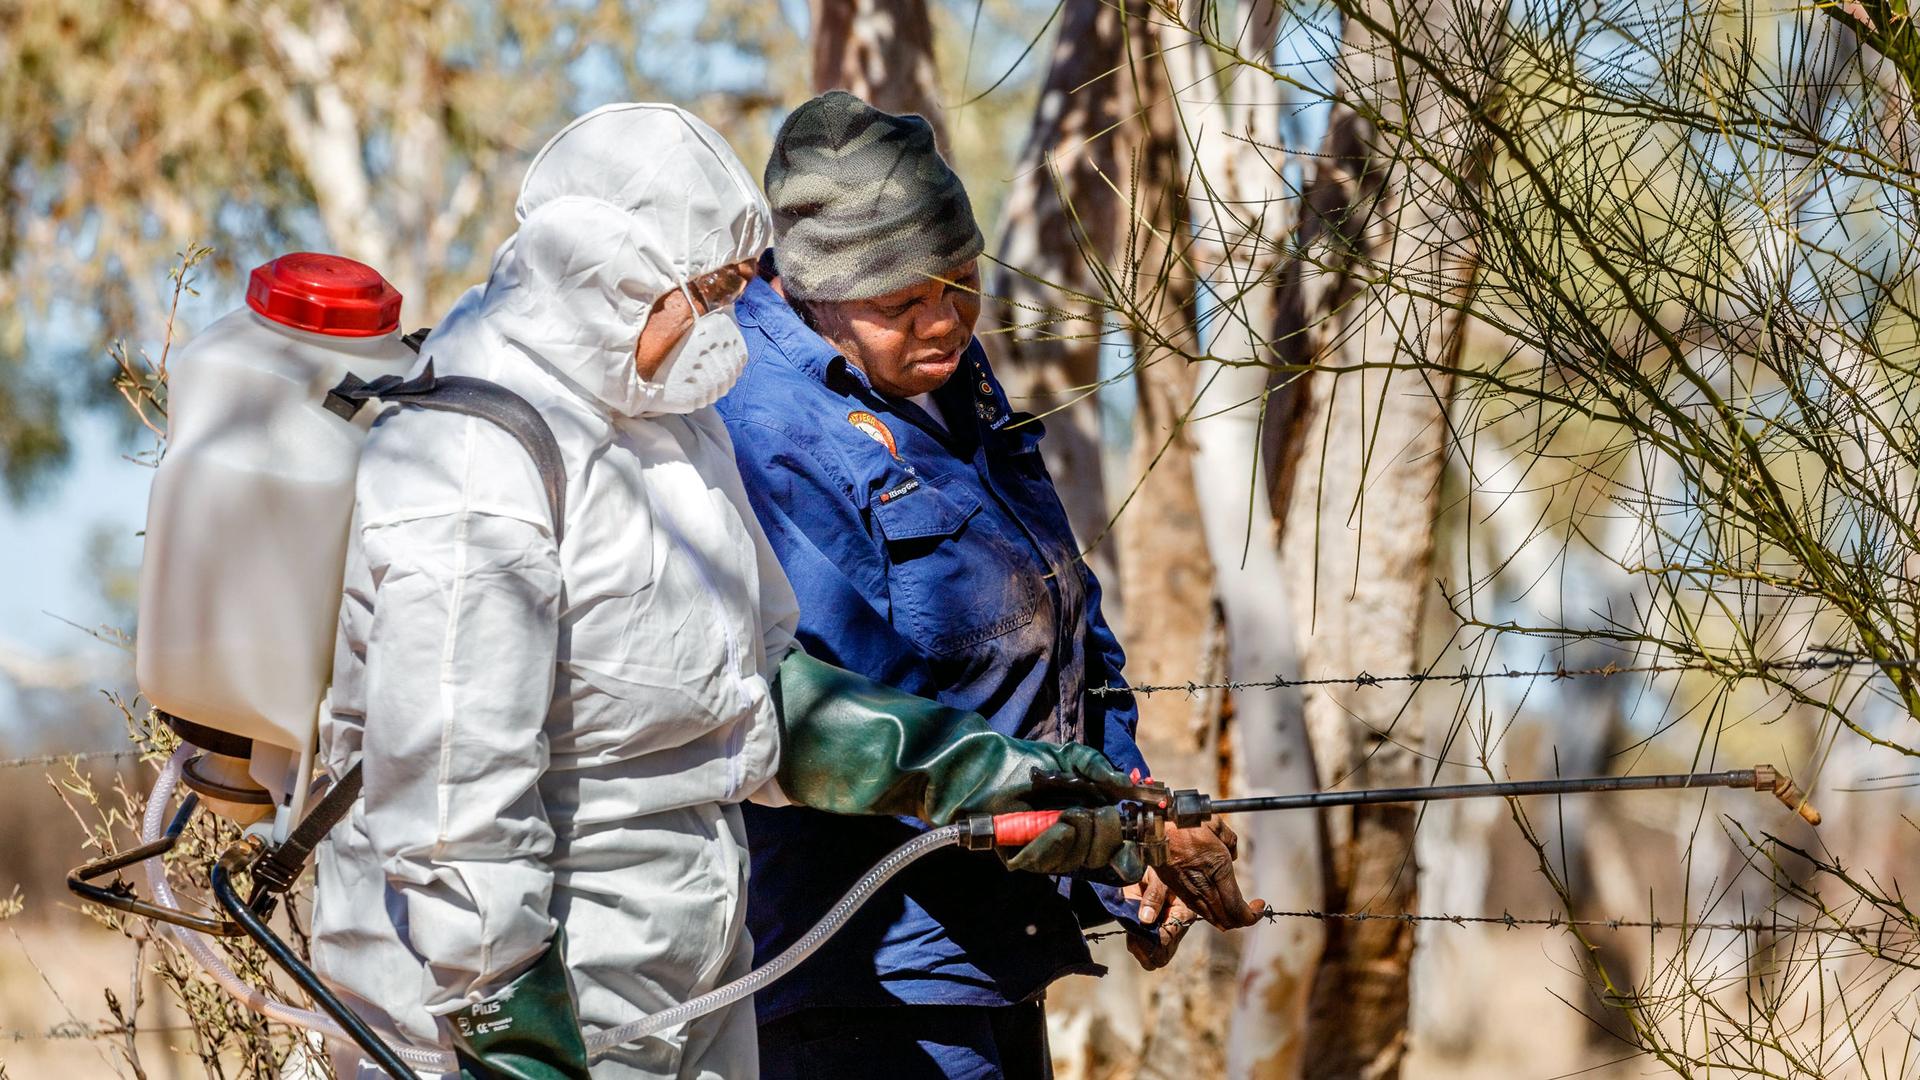 One woman wears an white protective suit and has a large plastic jug strapped to her back; another woman stands next to her as both inspect a branch of a bush.